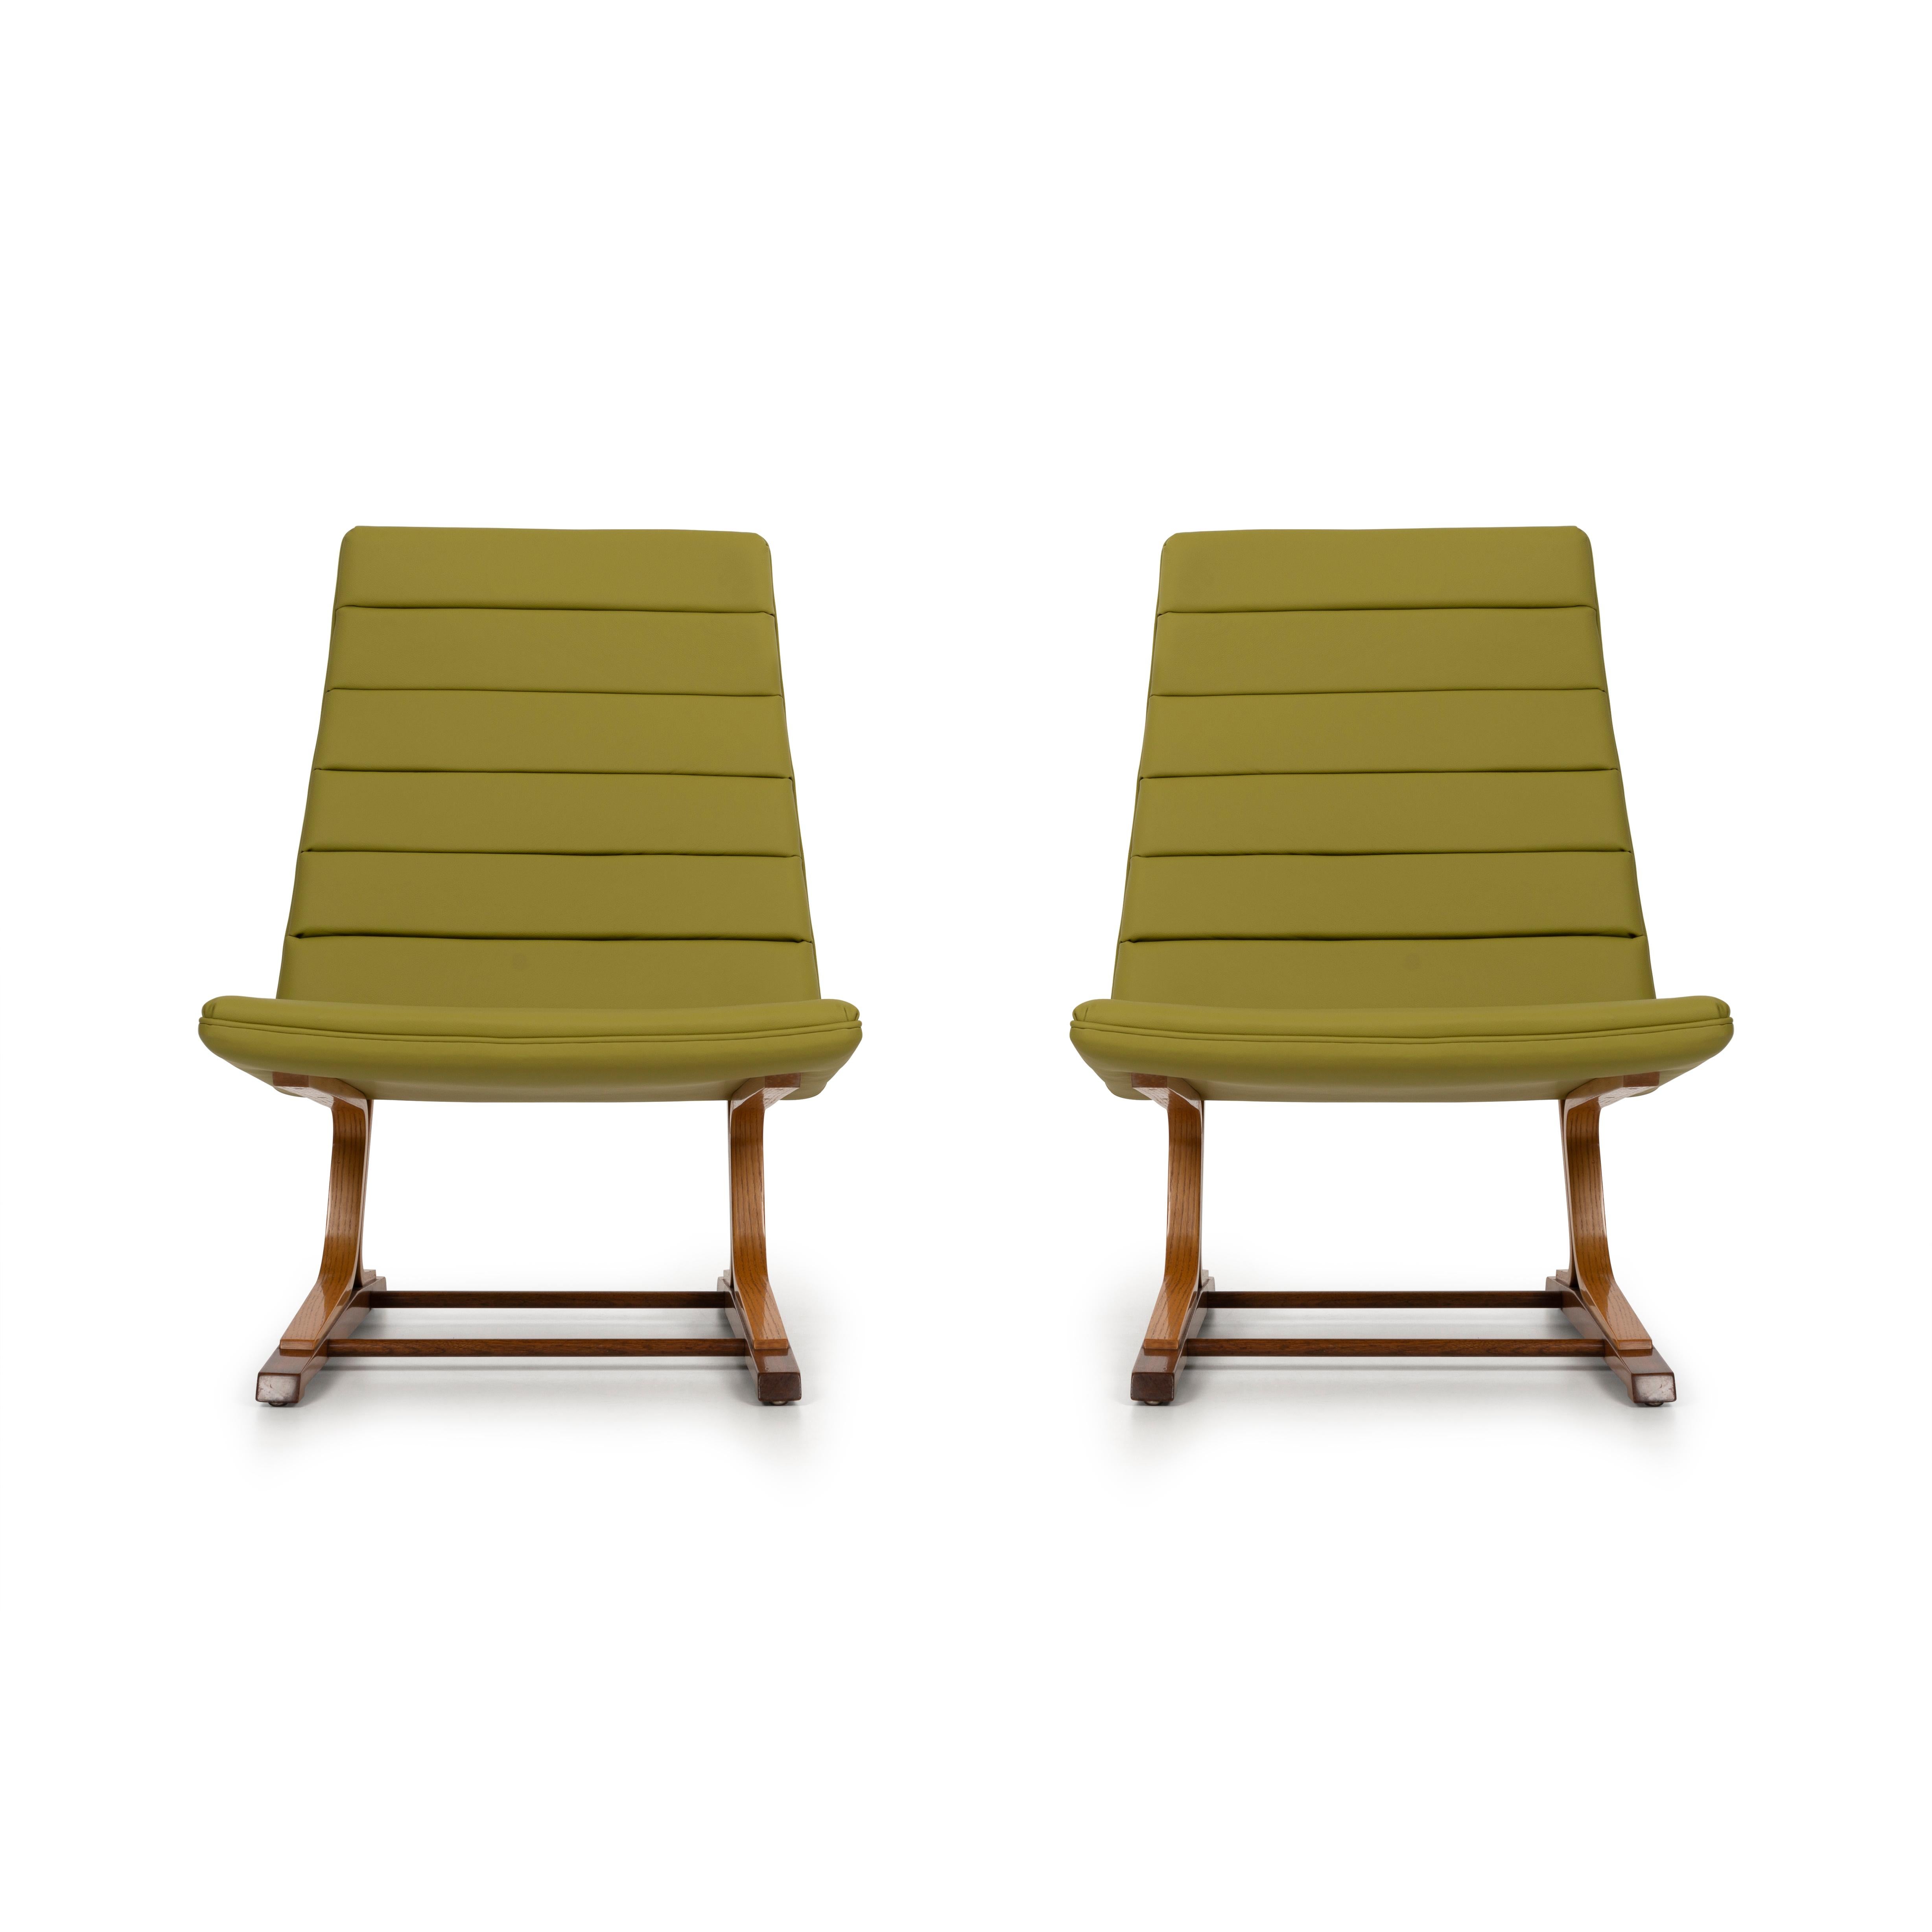 Roger Lee Sprunger for Dunbar pair of cantilever lounge chairs, model 480, oakwood and Mahogany two-toned base structures, oil finish, reupholstered with spinney beck leather.